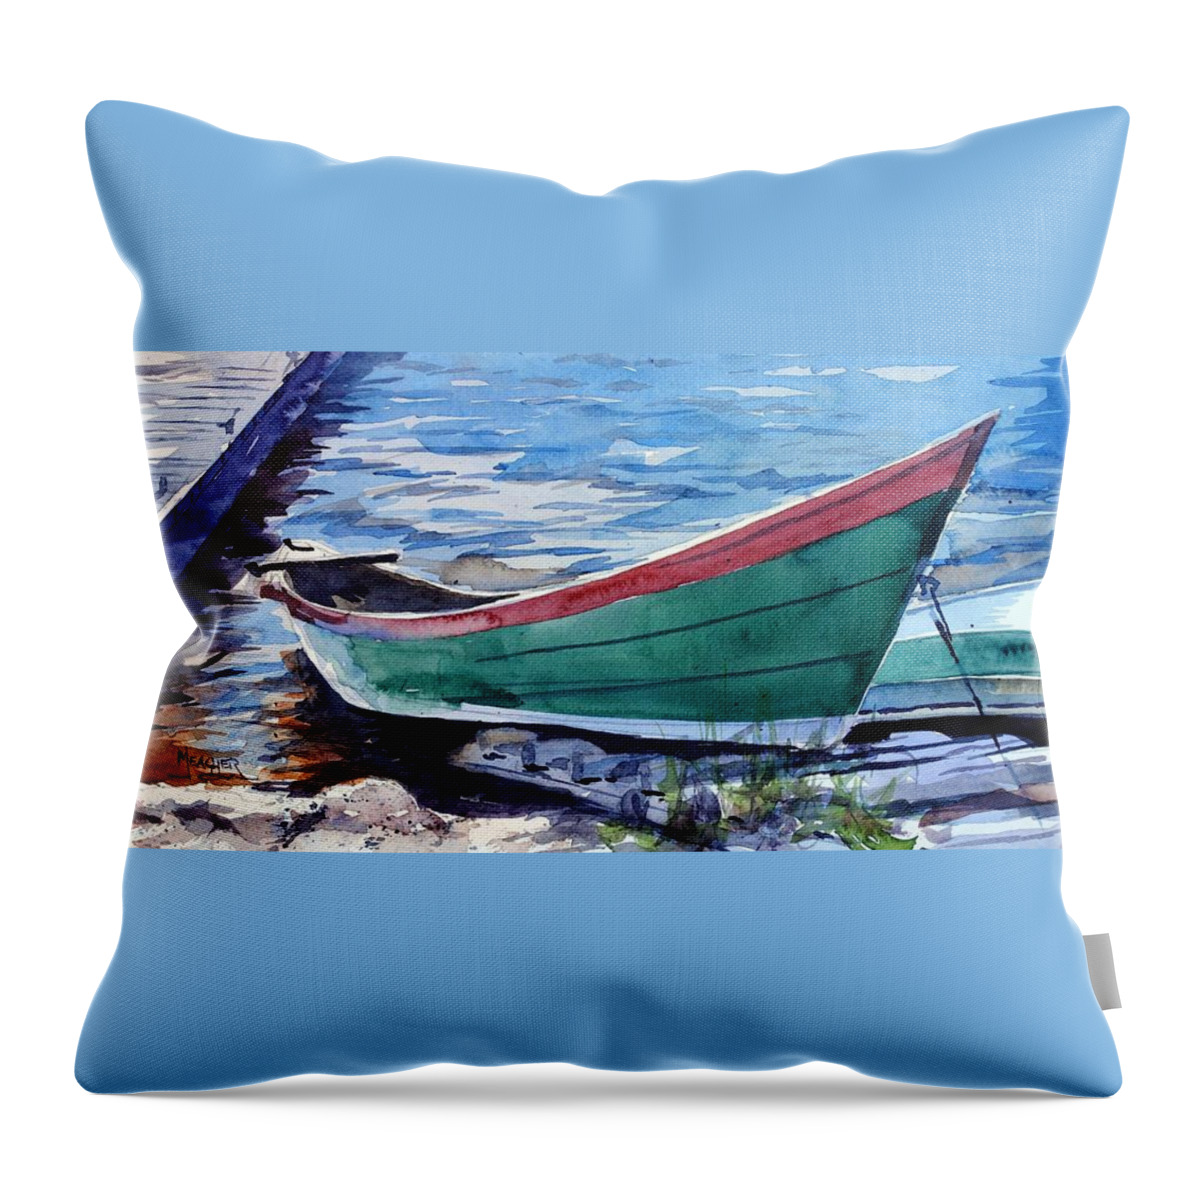 Boat Throw Pillow featuring the painting North Shore Fishing Skiff by Spencer Meagher